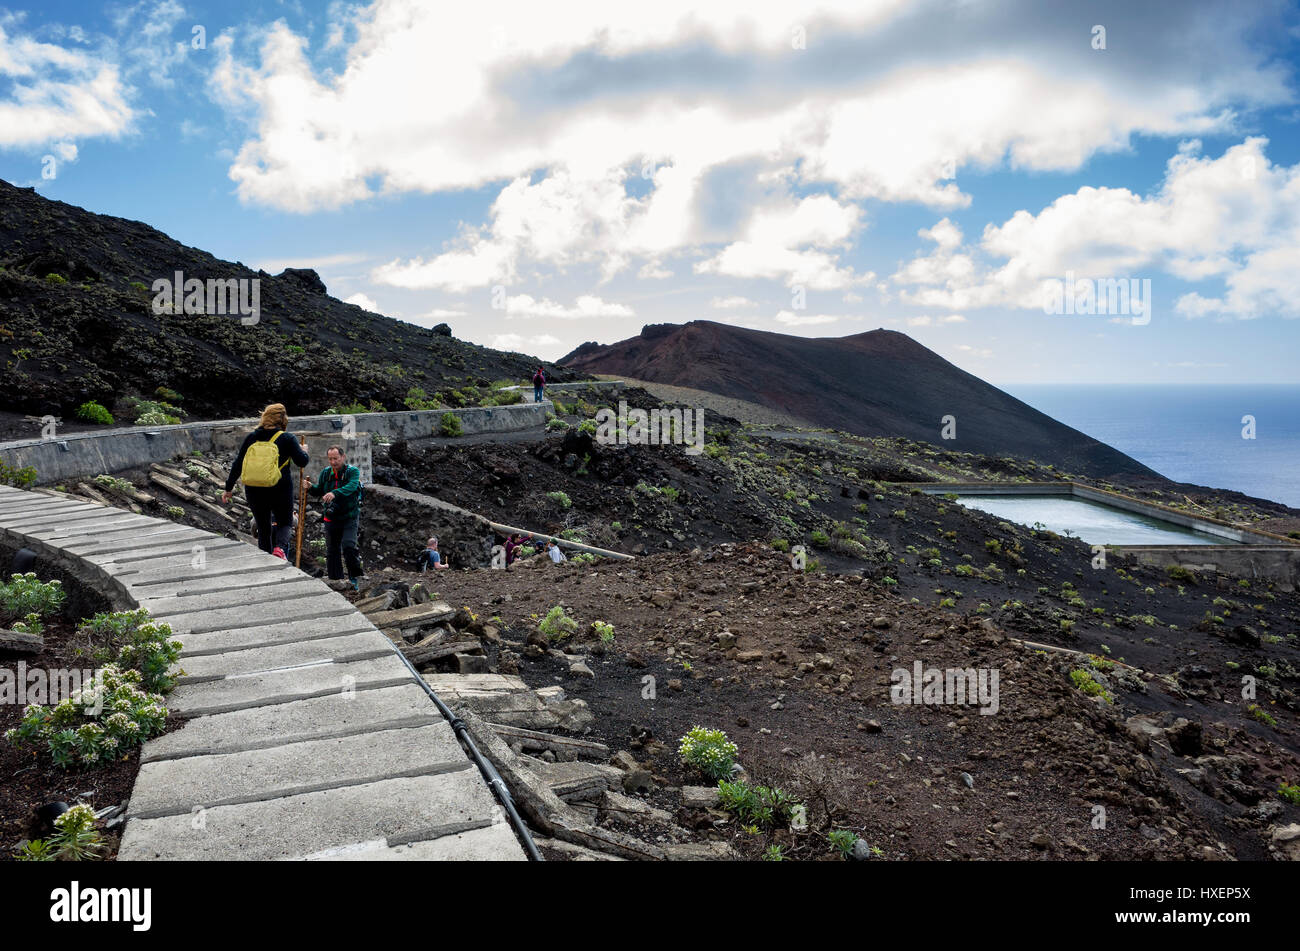 Cumbre Vieja, Fuencaliente, La Palma. . Some hikers taking the man made path that passes the water reservoir that is used to supply the water plantations.  It's a bright day with fast moving clouds along the coastline. Stock Photo